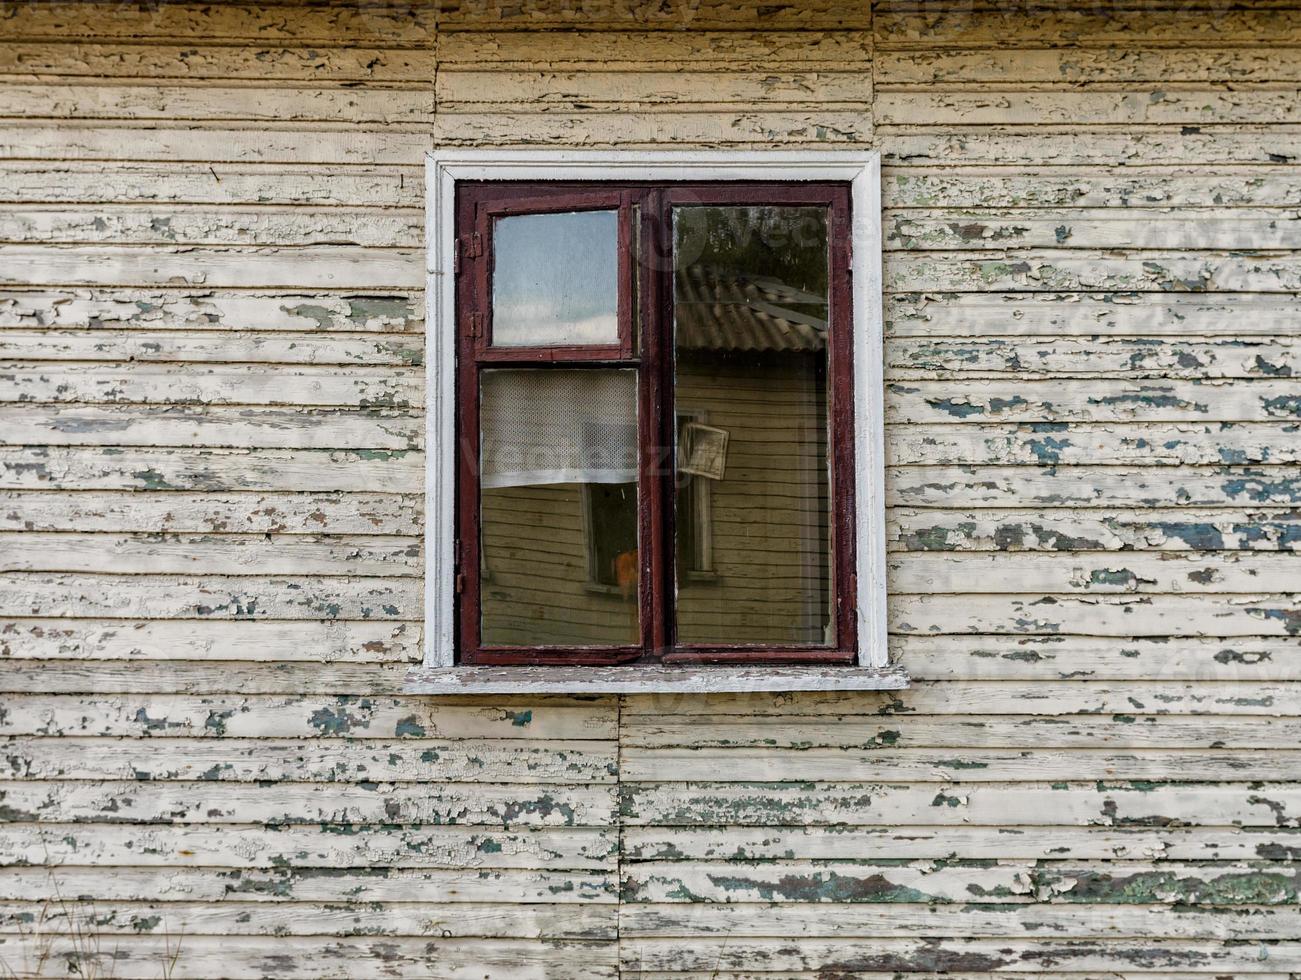 Walls and window of an old abandoned wooden house in Ukraine photo